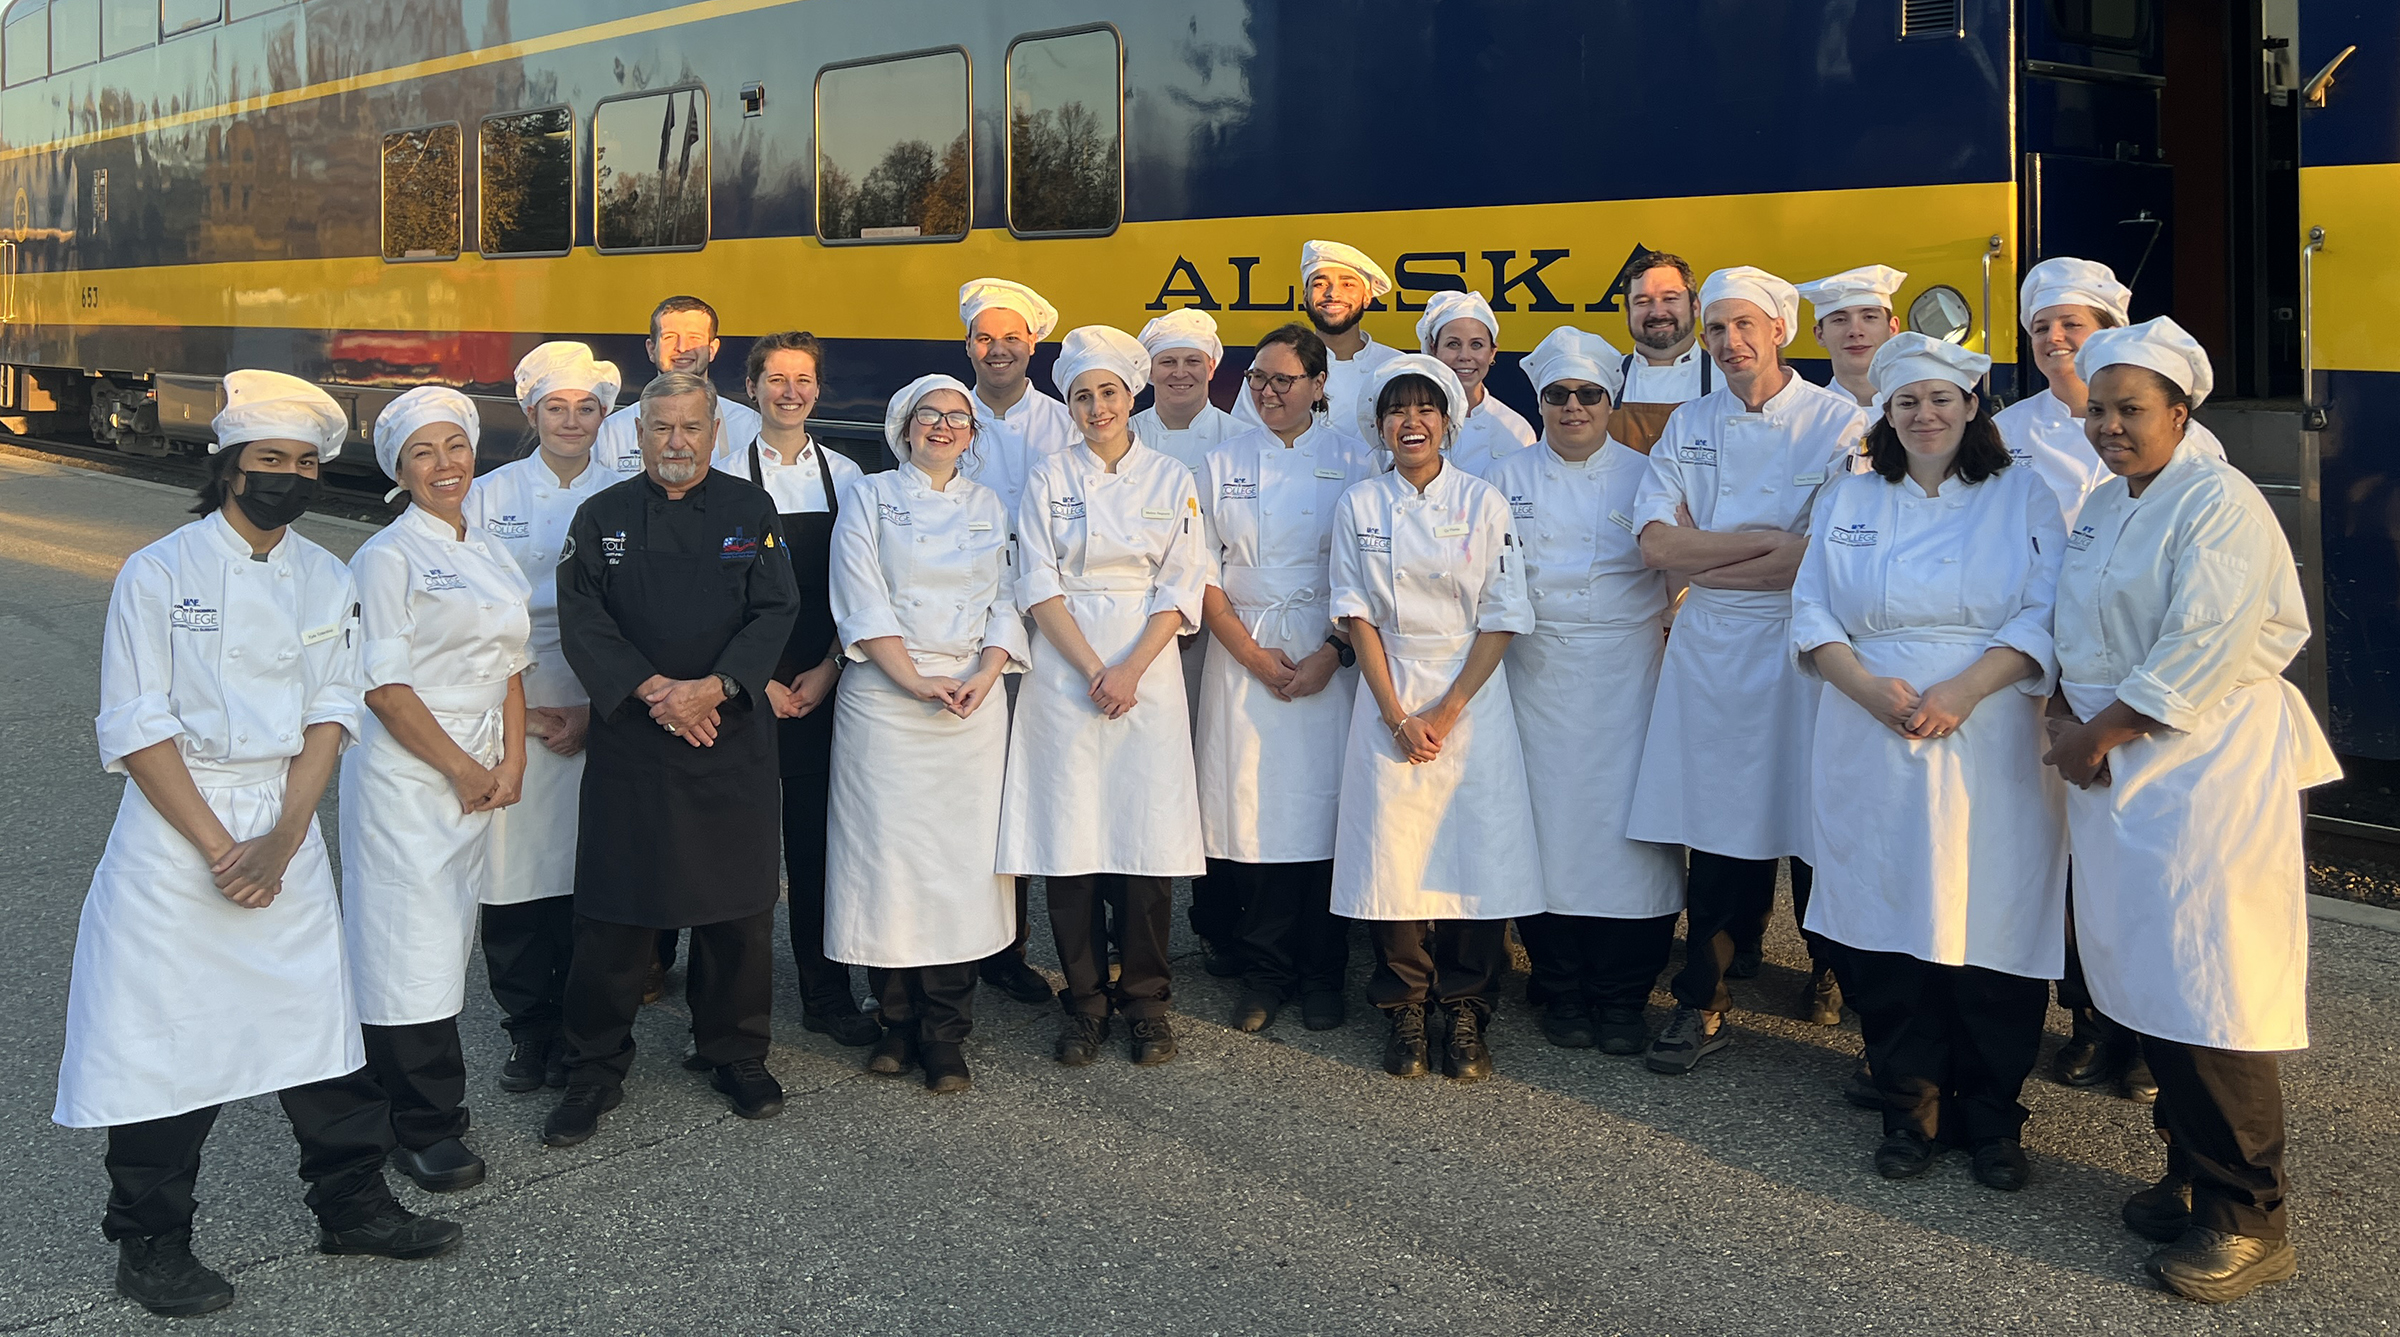 UAF Community and Technical College Culinary Arts and Hospitality staff, faculty and students gather in front of the train following the event.